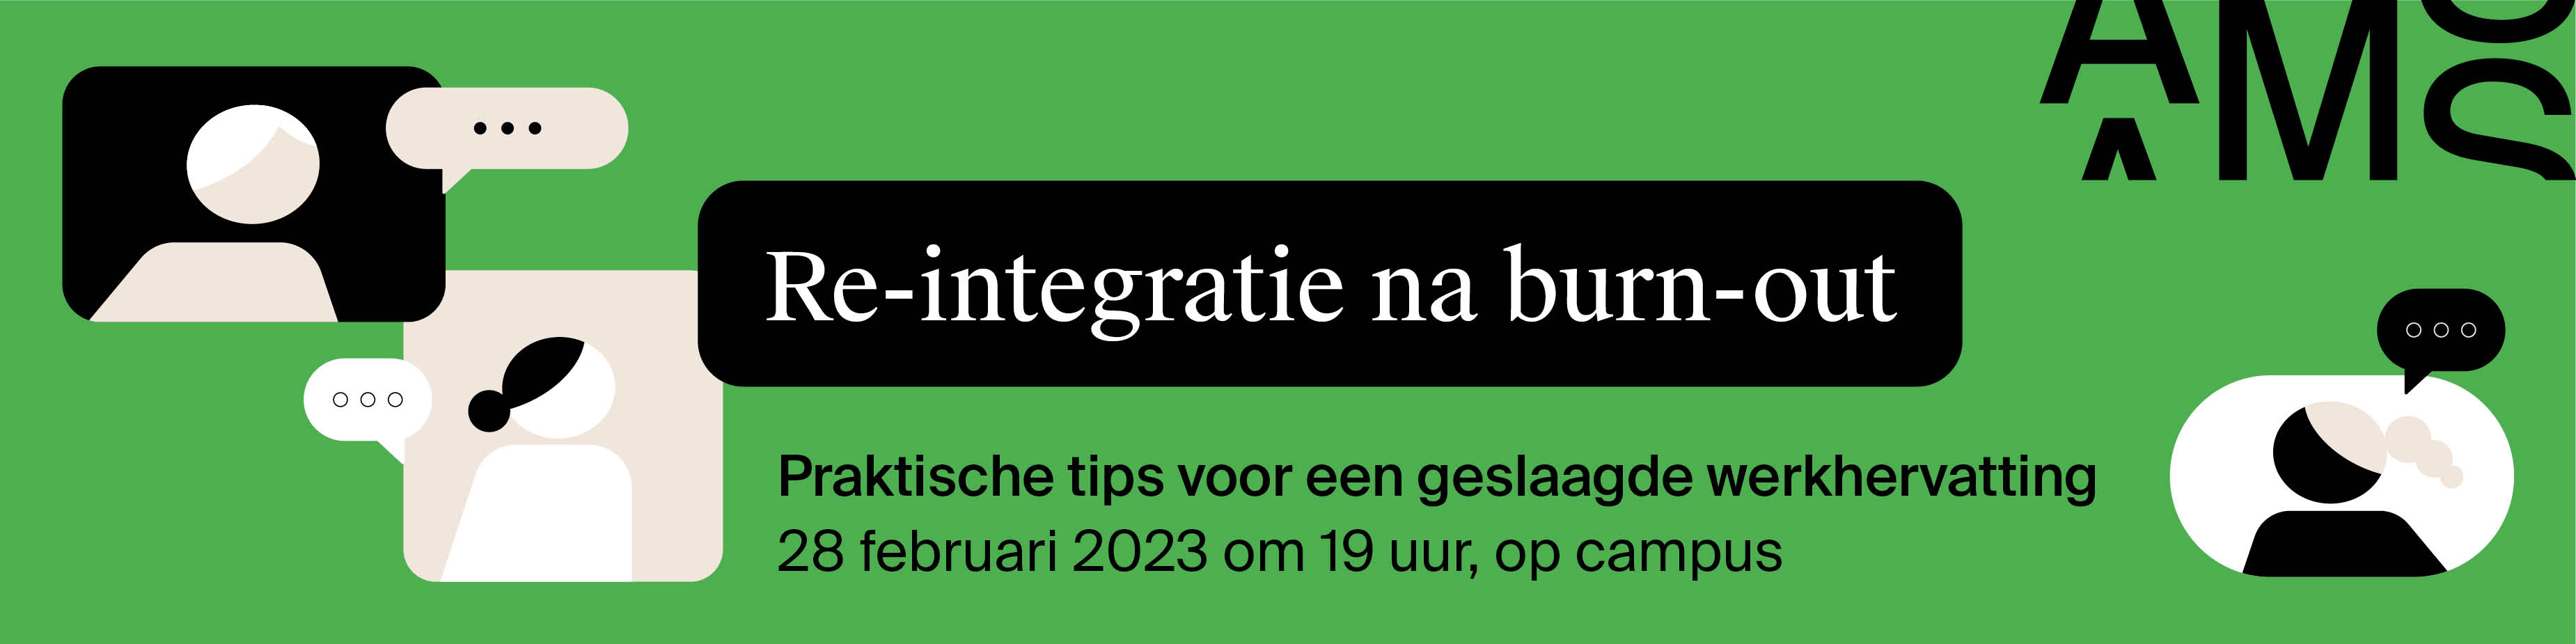 AMS_Re-integratie na burn-out_Banner_Small